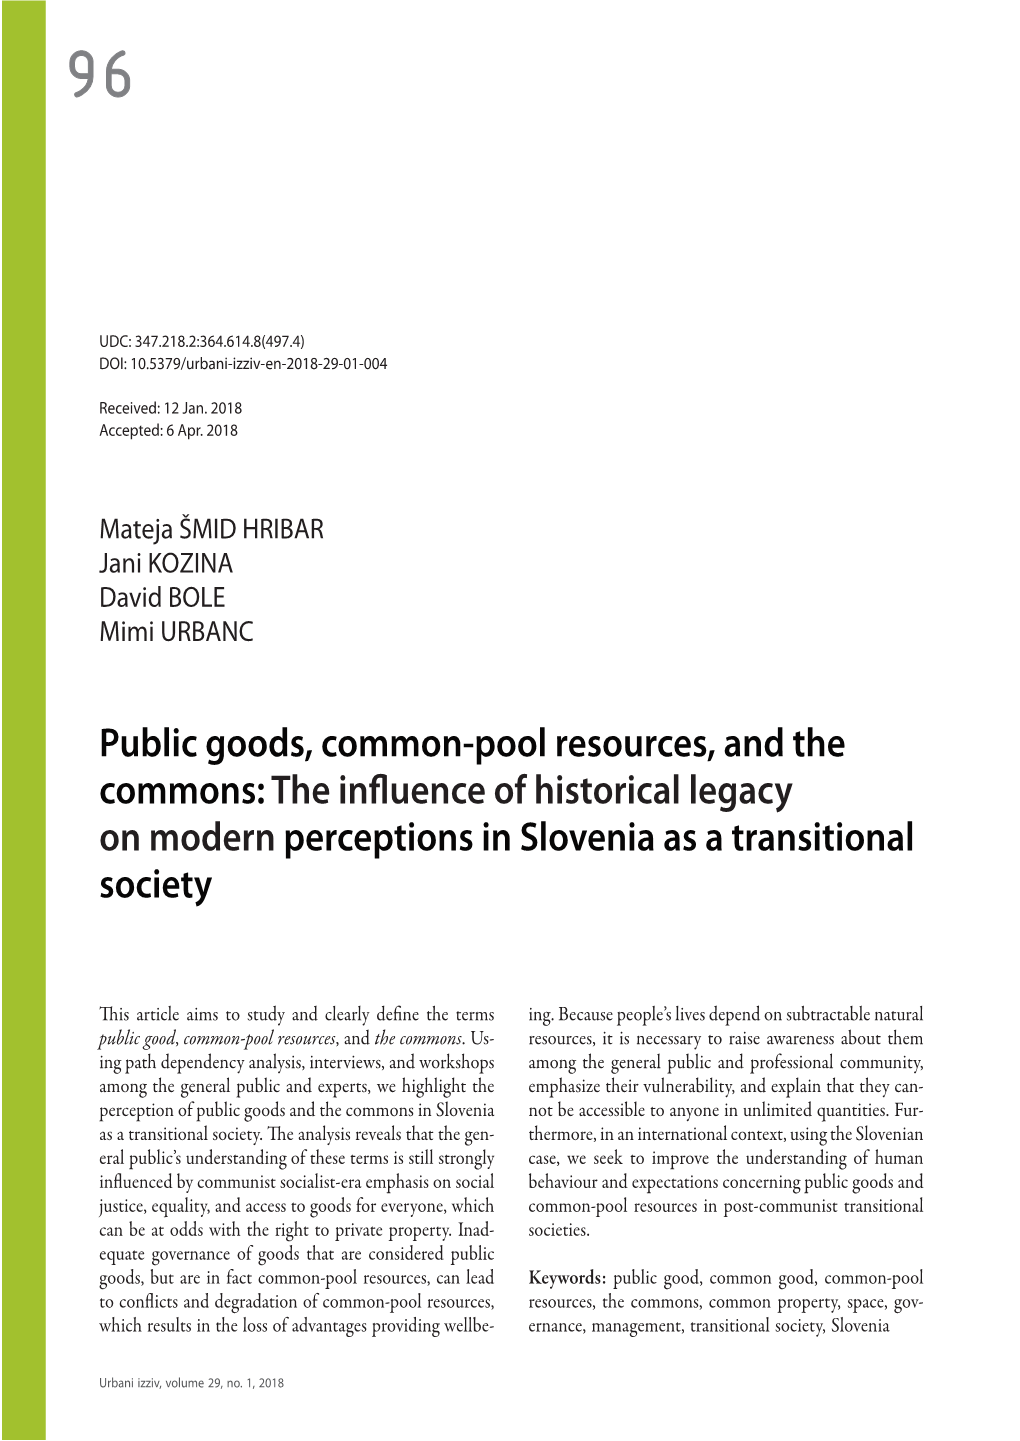 Public Goods, Common-Pool Resources, and the Commons: the Influence of Historical Legacy on Modern Perceptions in Slovenia As a Transitional Society